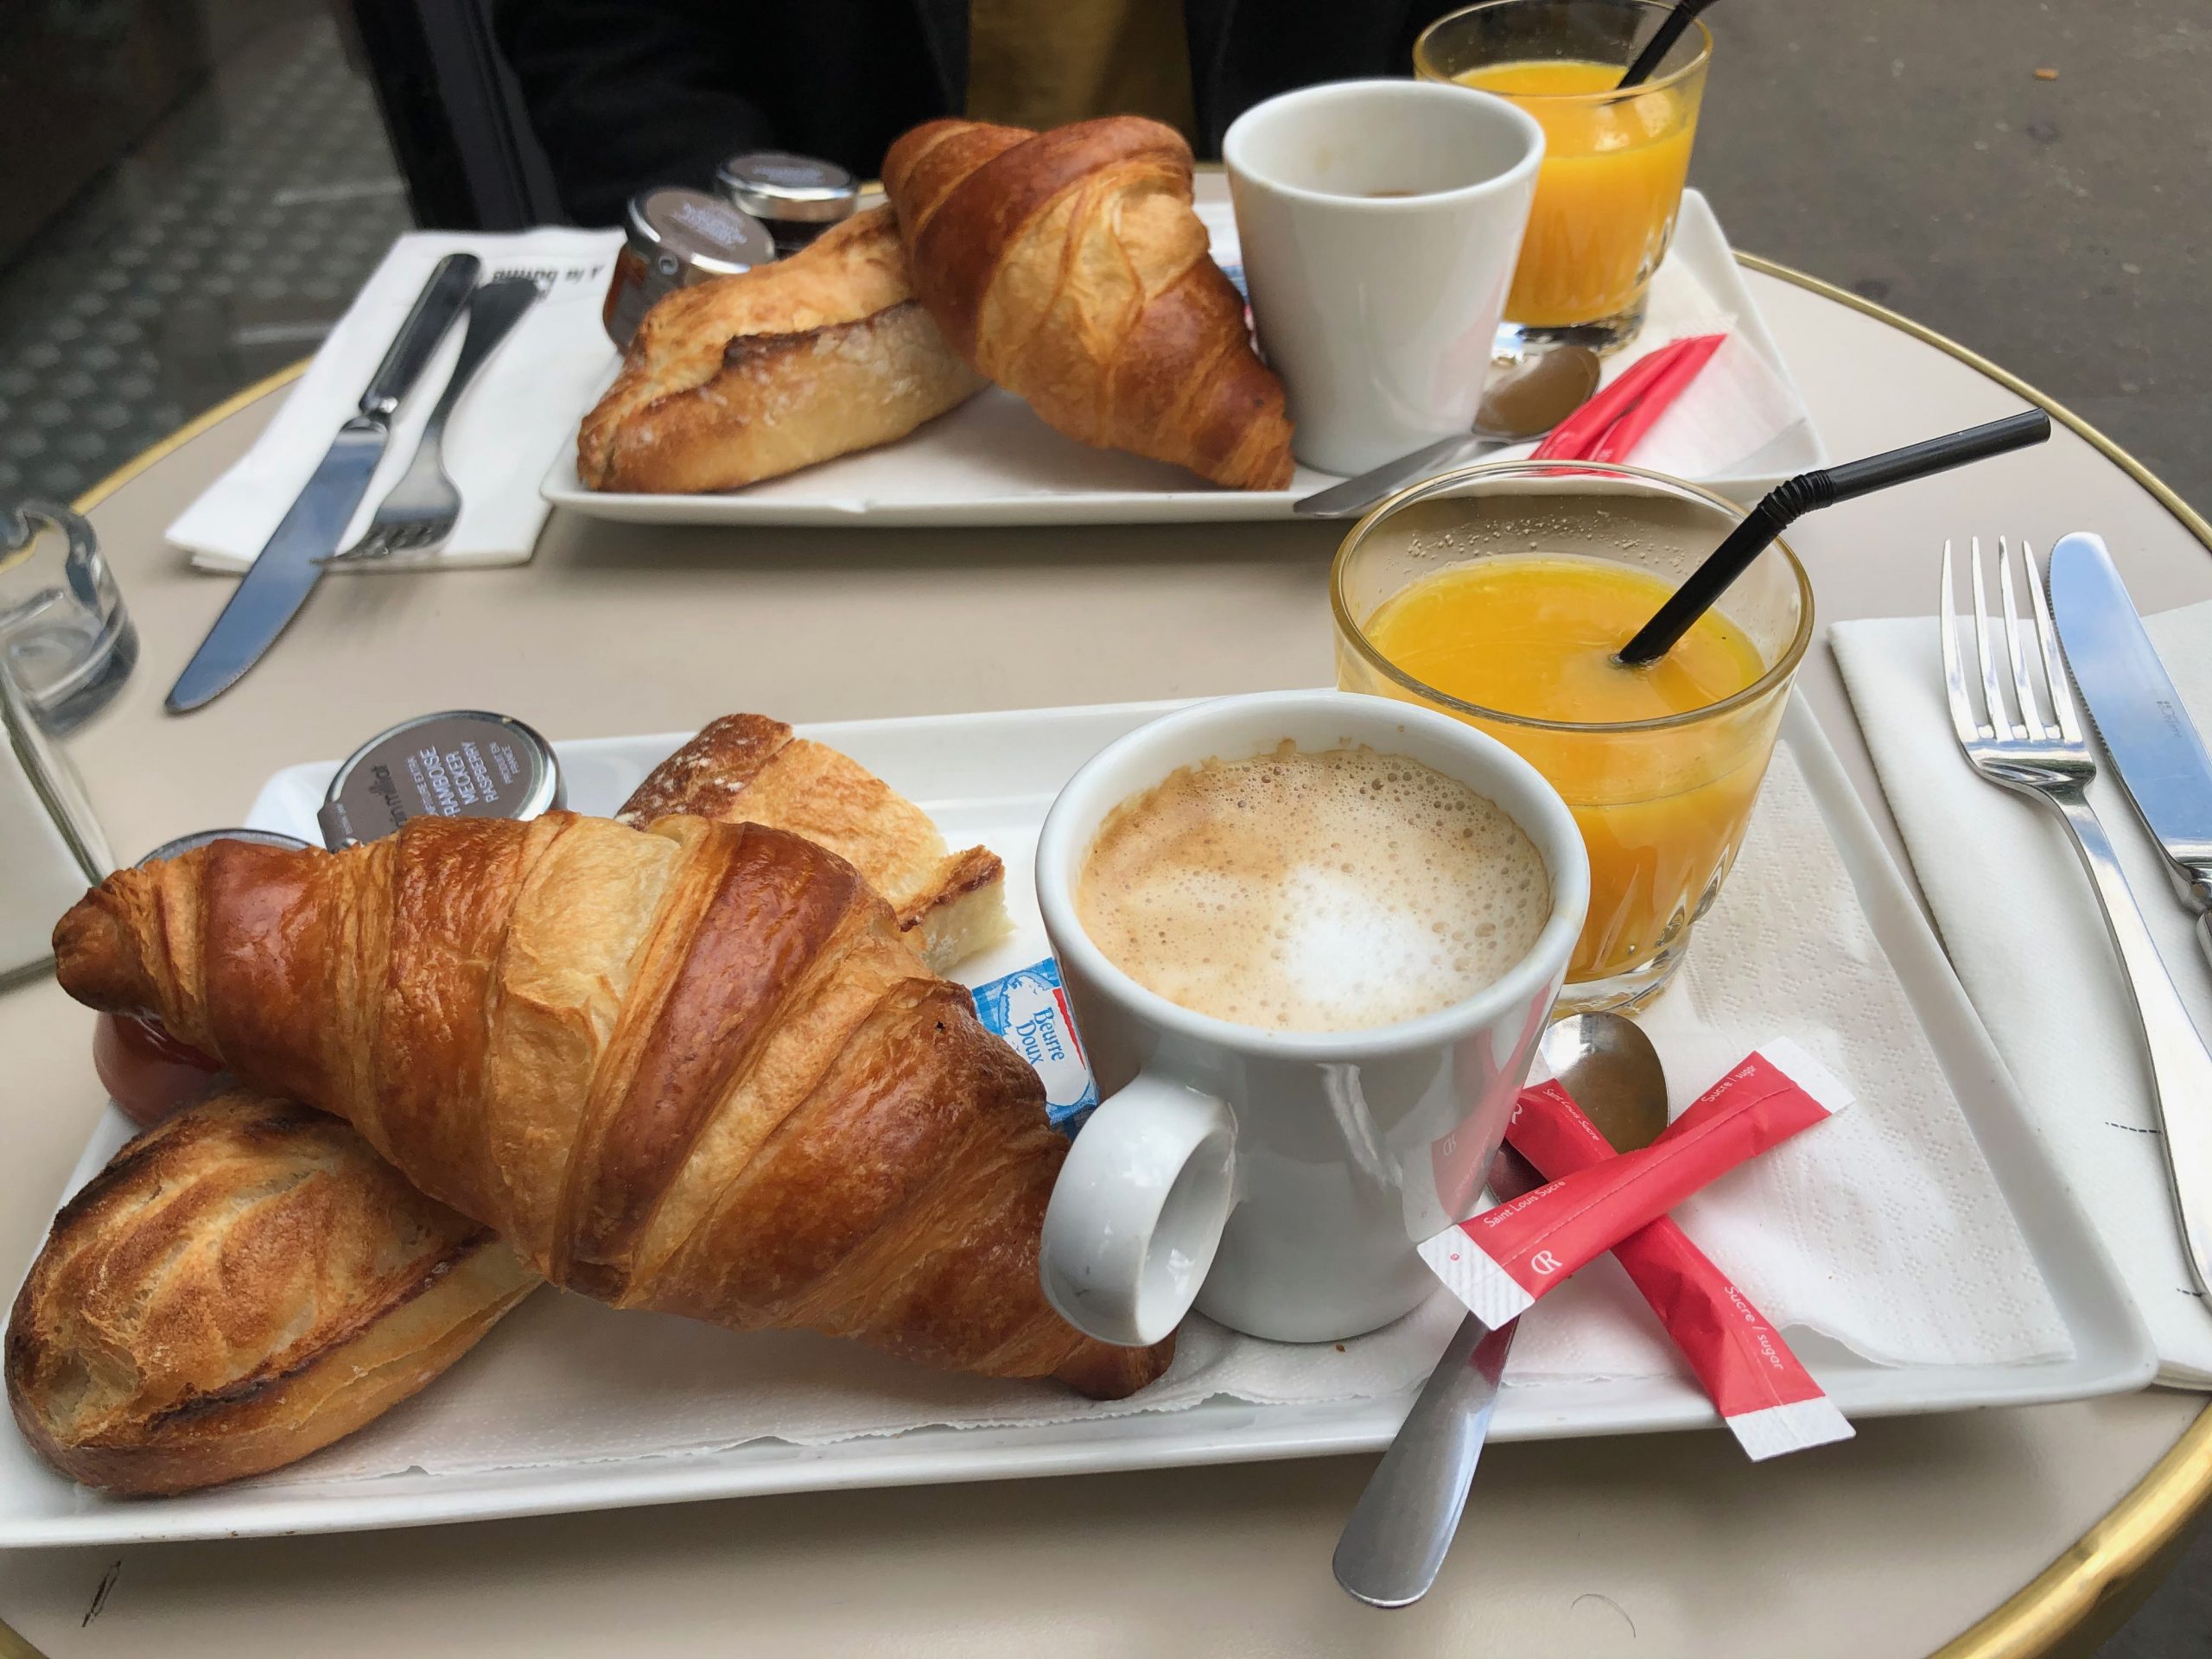 What are the characteristics of a traditional French breakfast